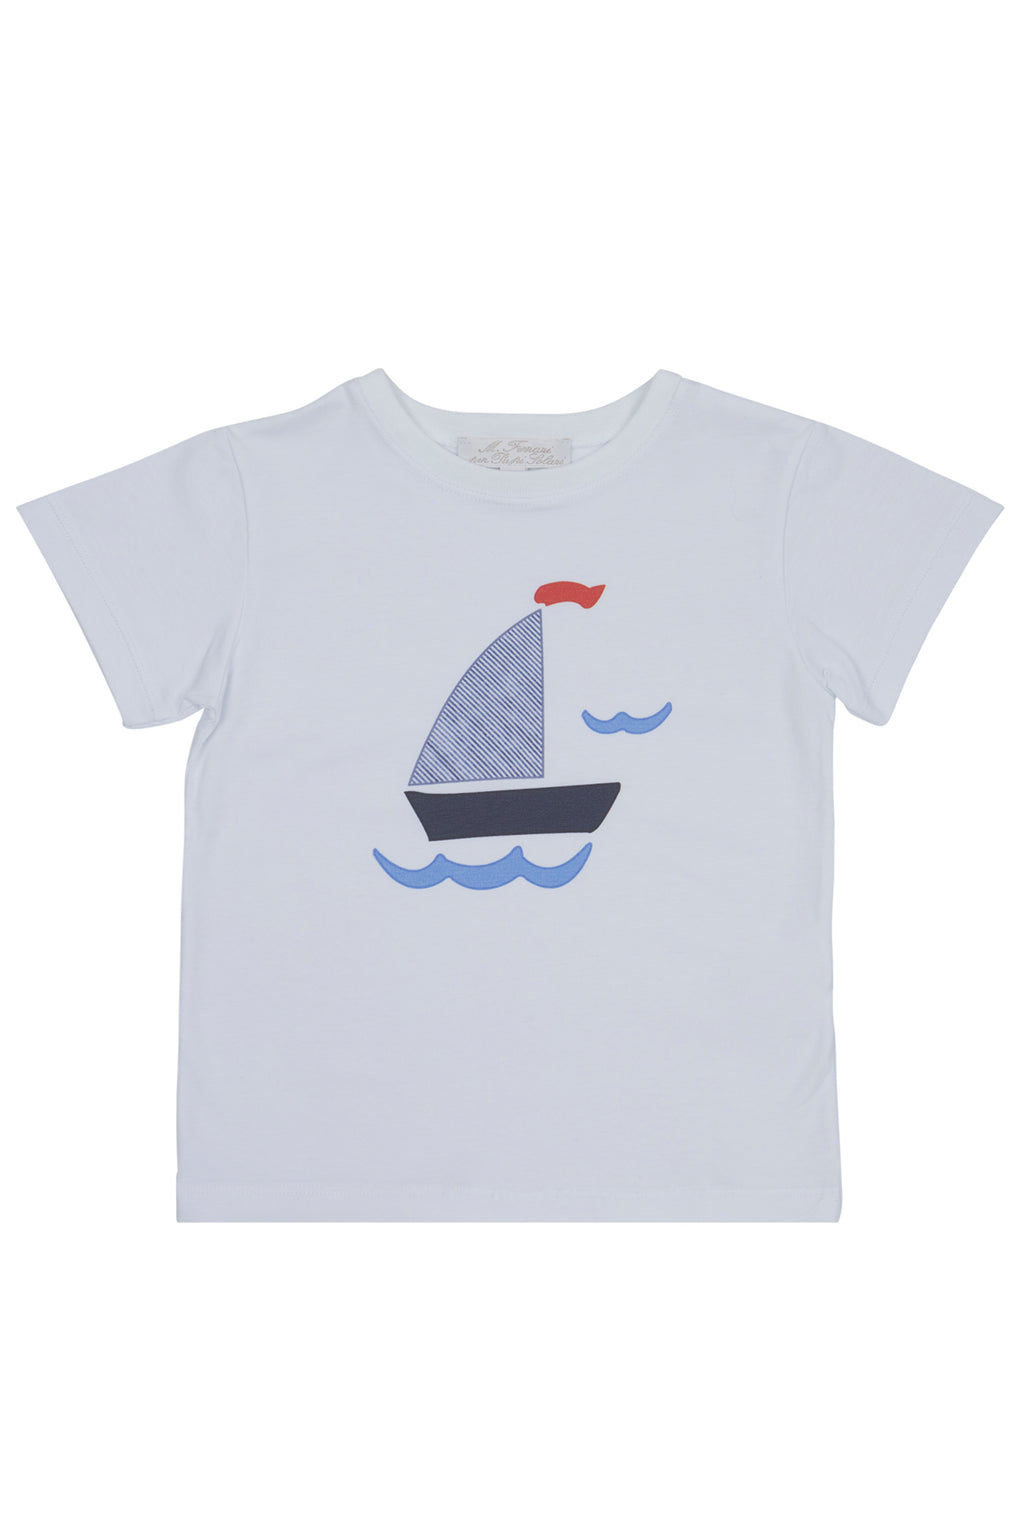 T-SHIRT WITH BOAT PRINT